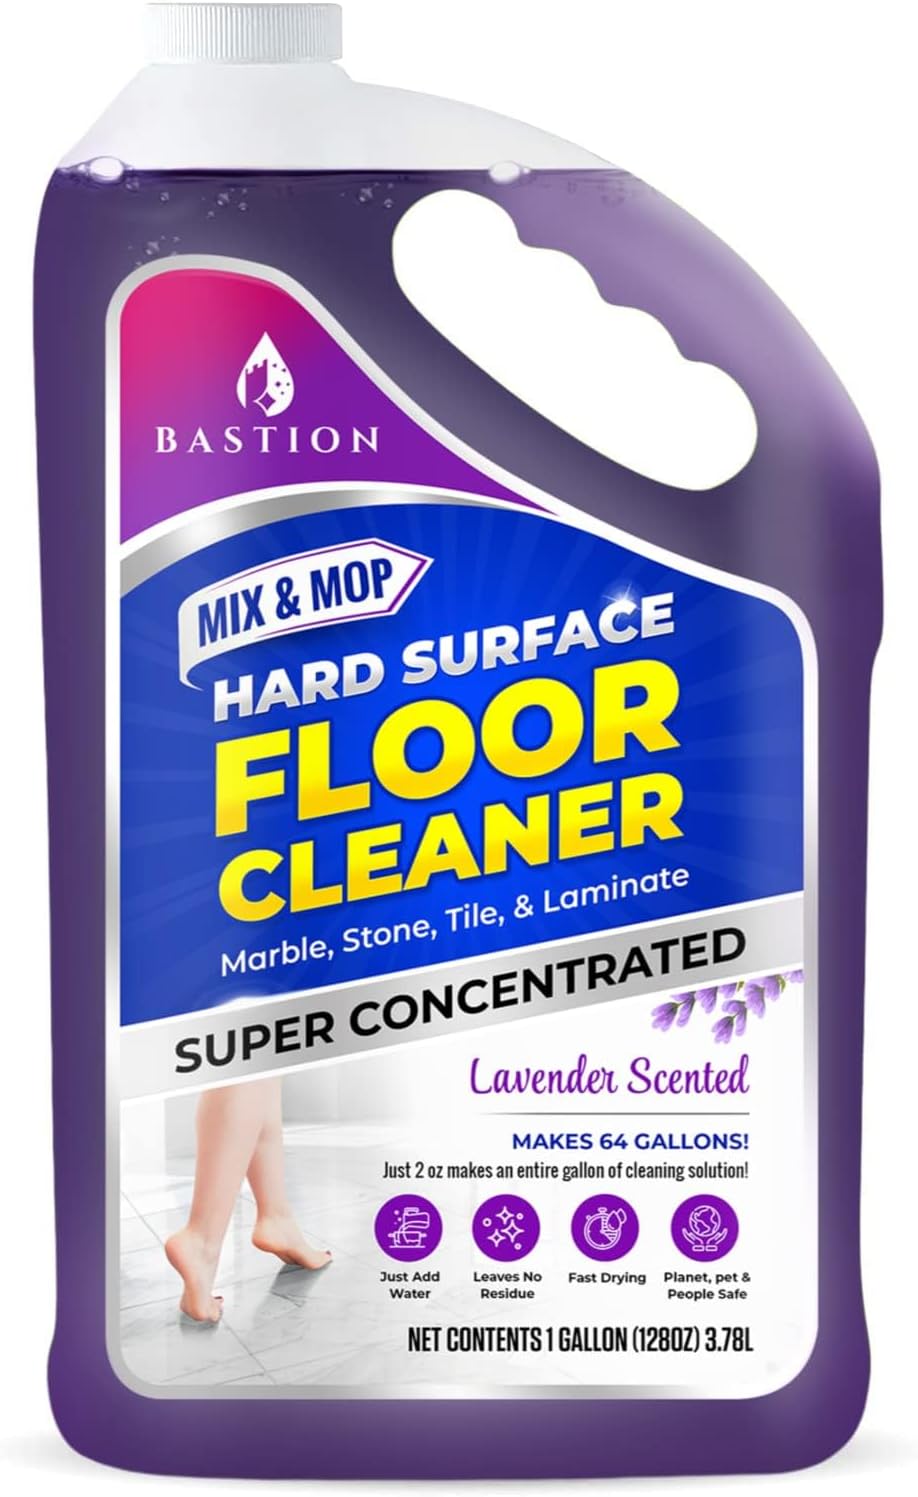 Hard Surface Liquid Floor Cleaner Solution Concentrate [...]